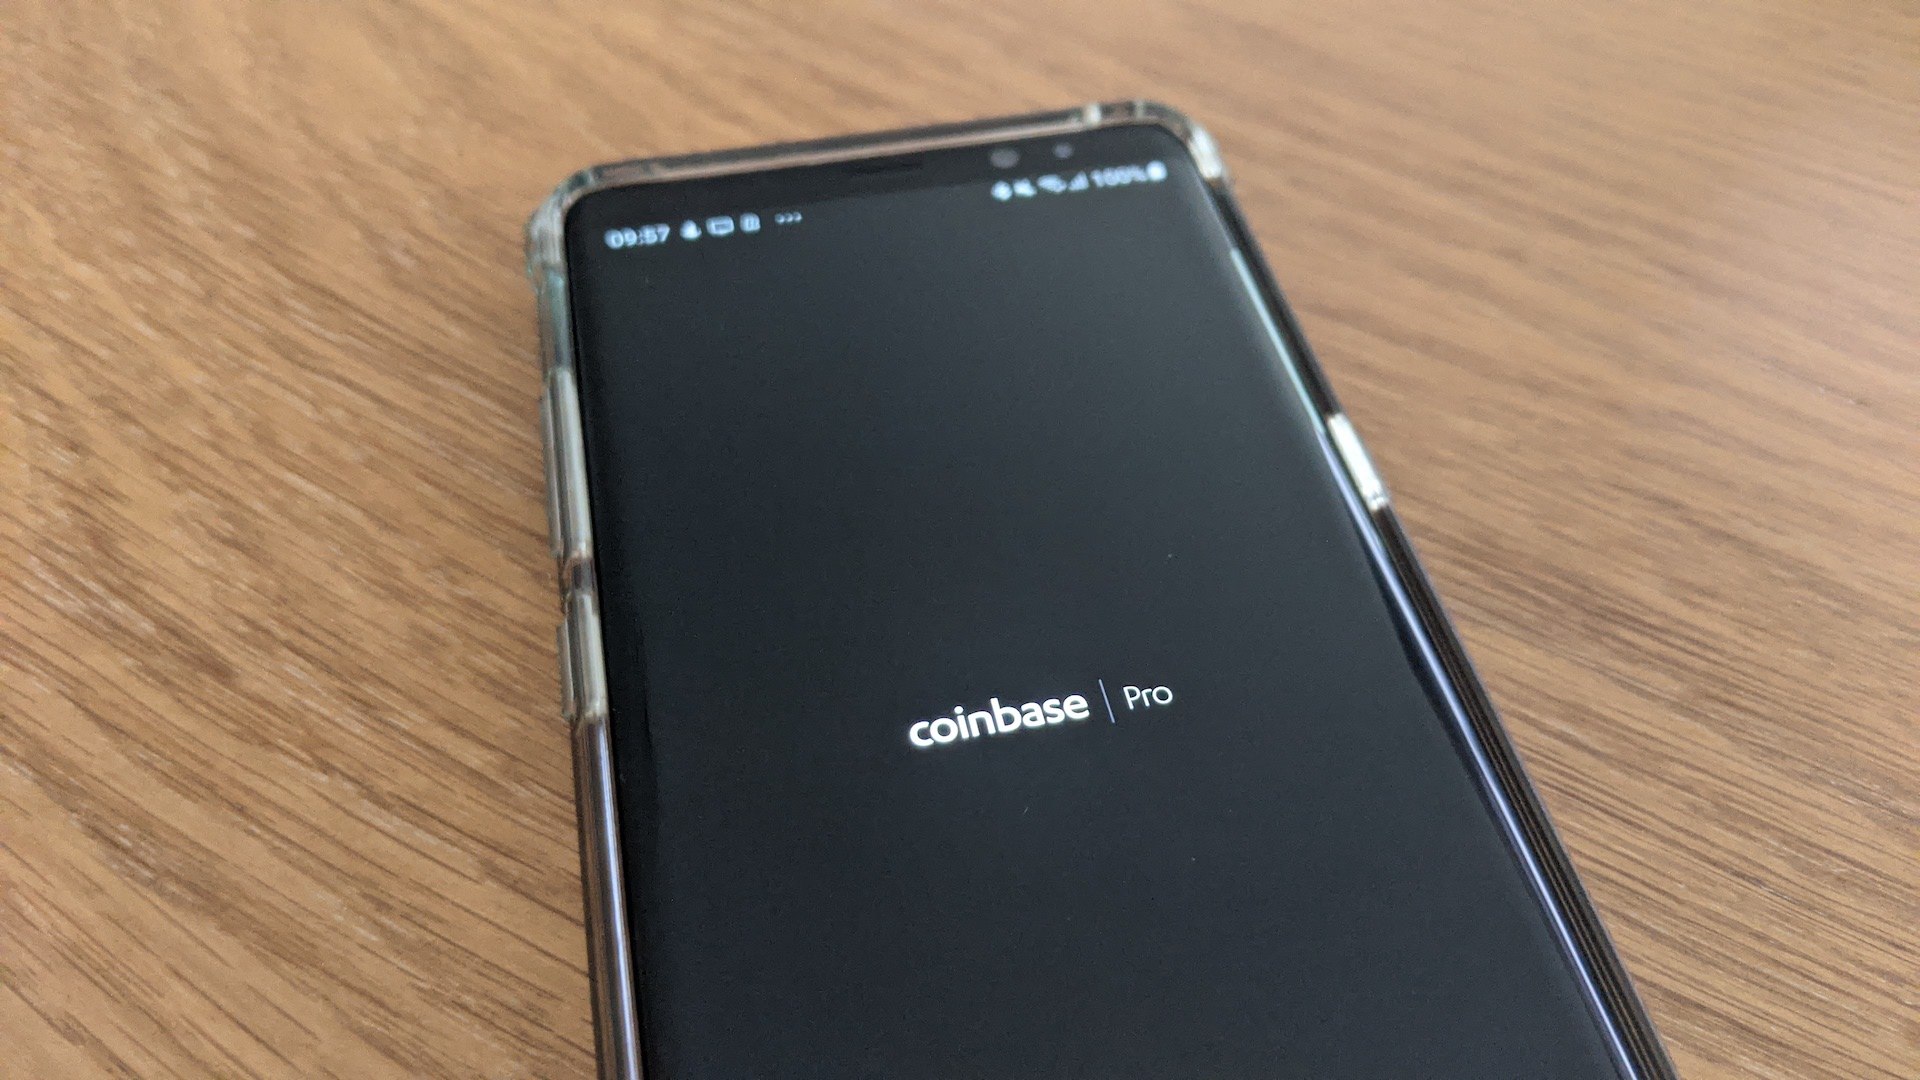 What Happens if I Lost My Phone Coinbase? | MoneroV